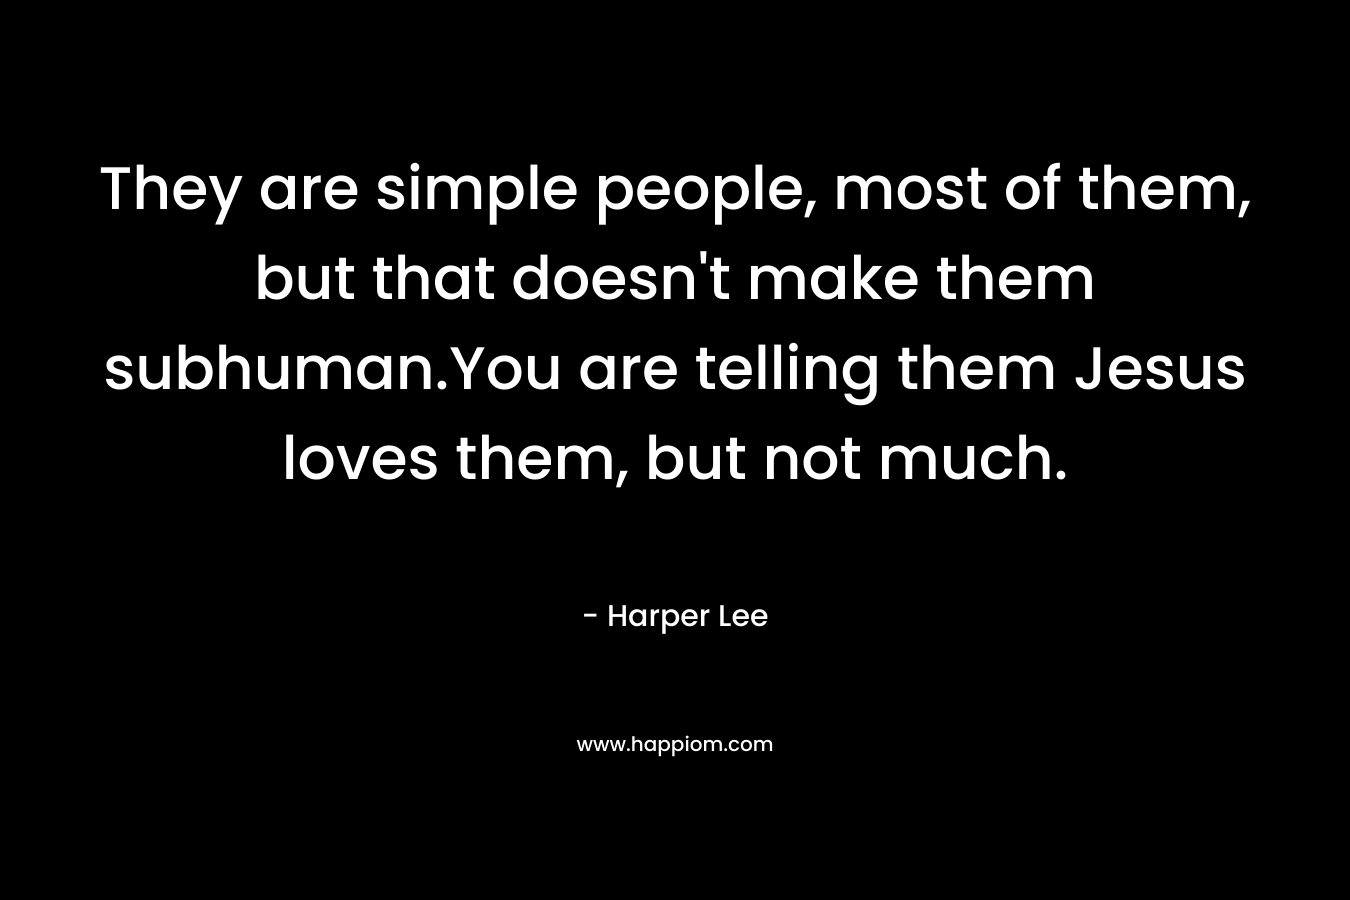 They are simple people, most of them, but that doesn’t make them subhuman.You are telling them Jesus loves them, but not much. – Harper Lee